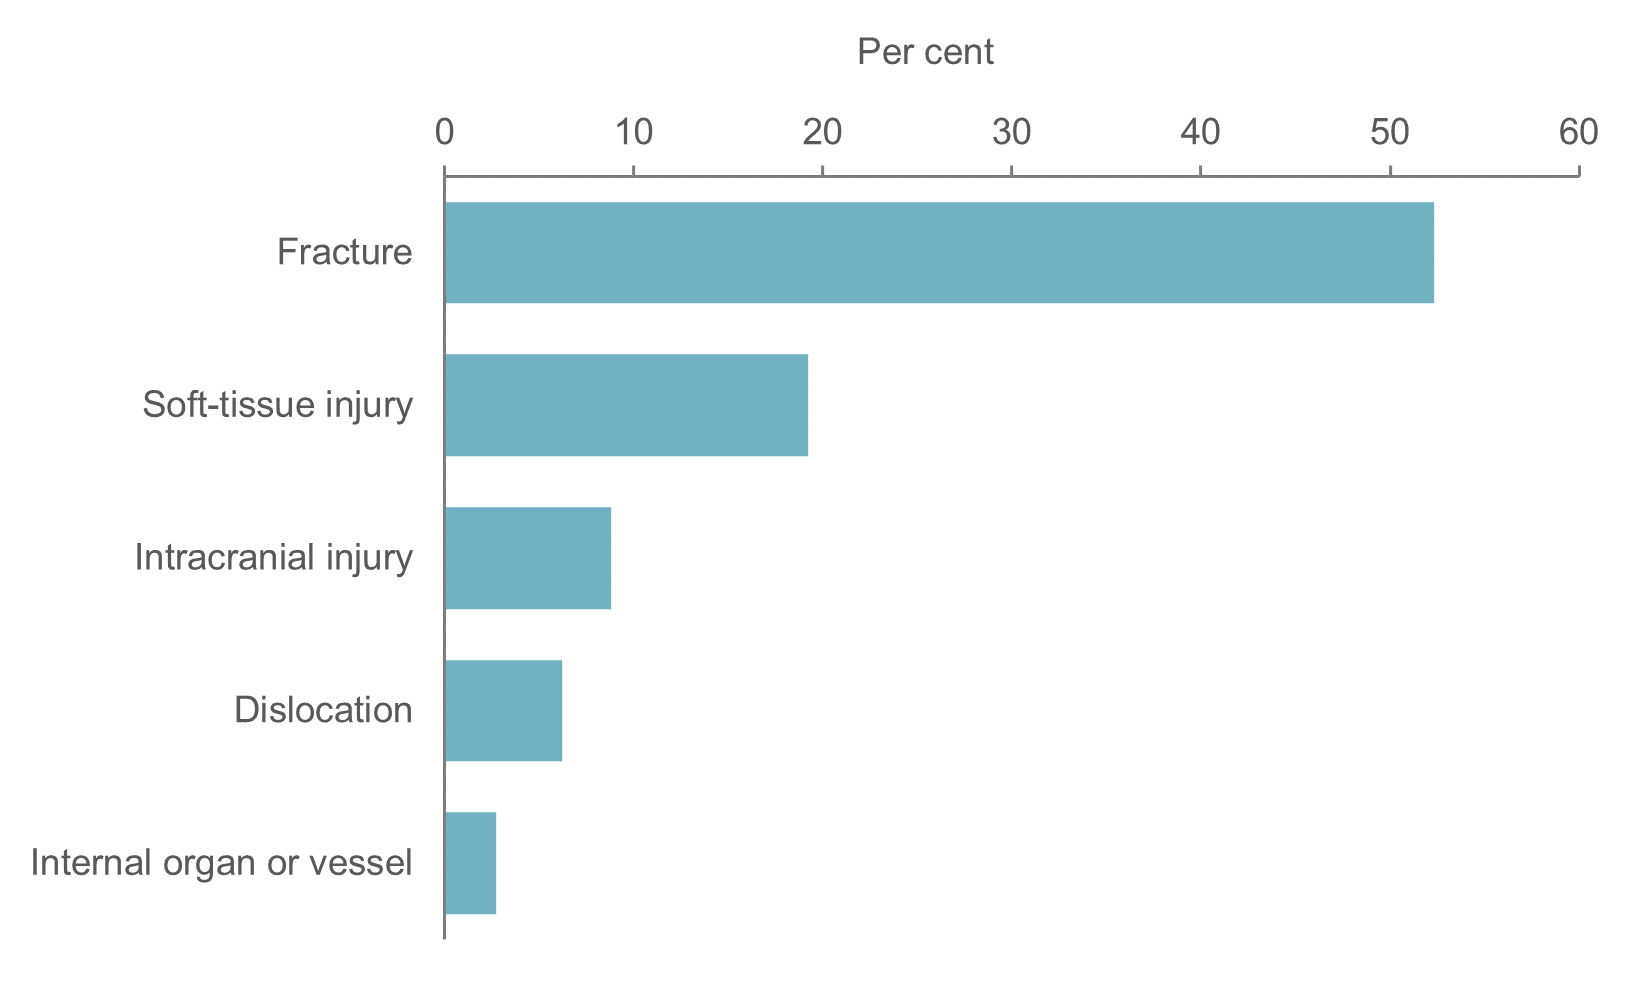 Bar chart shows fractures, soft-tissue, intracranial injuries, dislocations and internal organ or vessel were the main types of injuries in 2021–22.